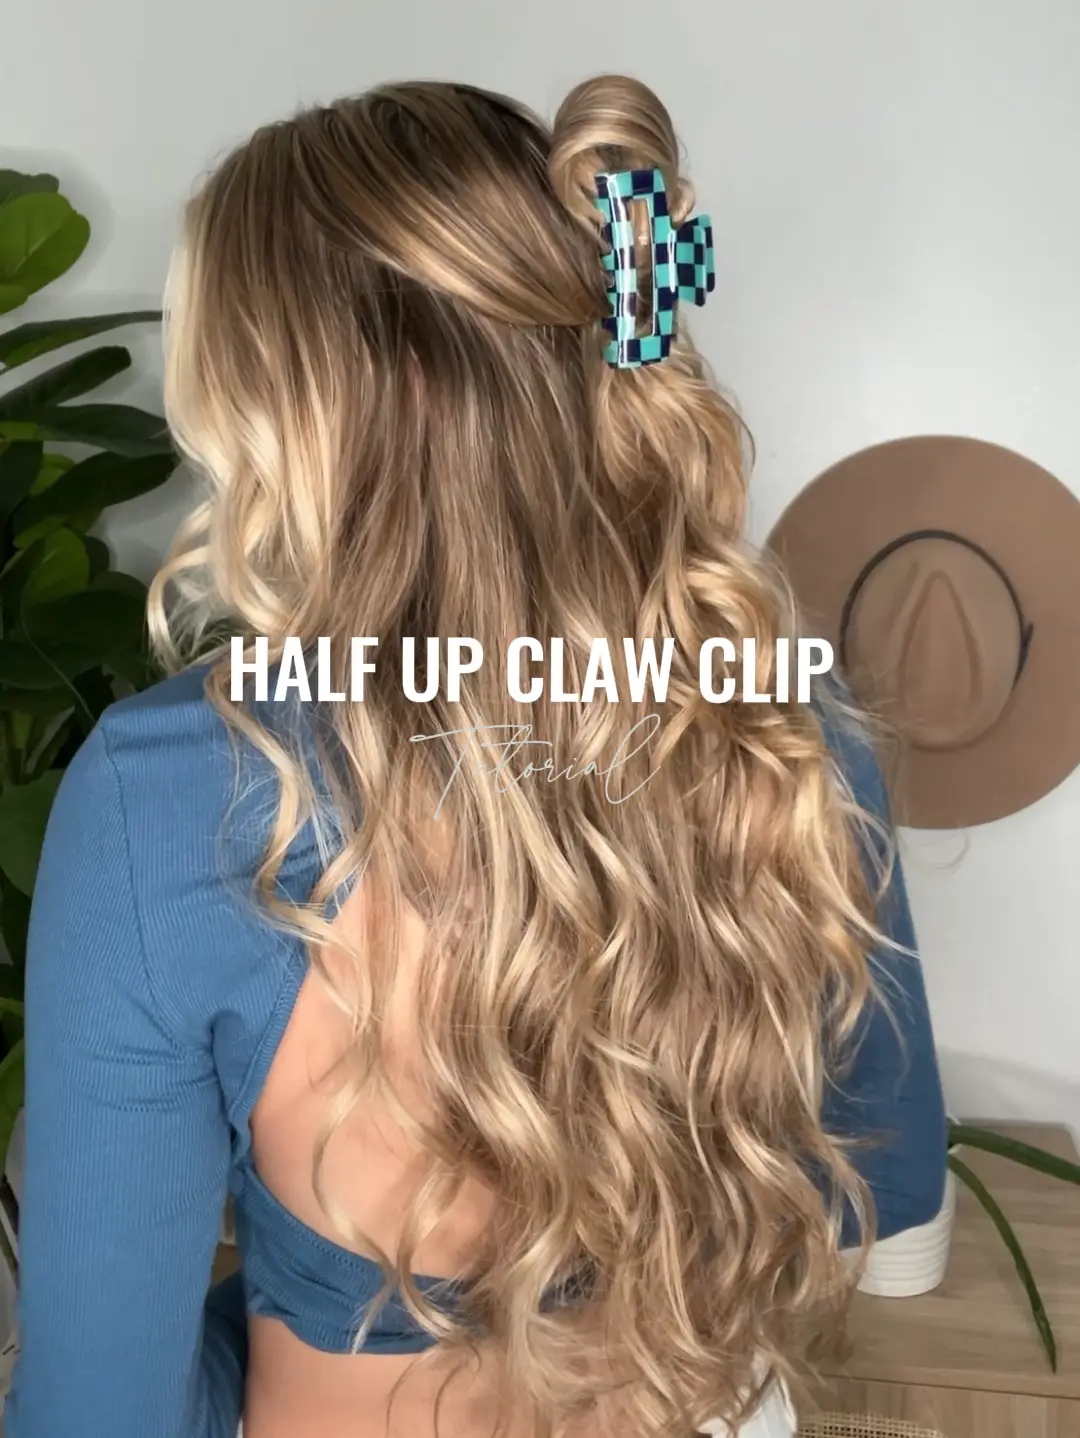 Half Up Claw Clip Tutorial  Video published by Michelle Kramer